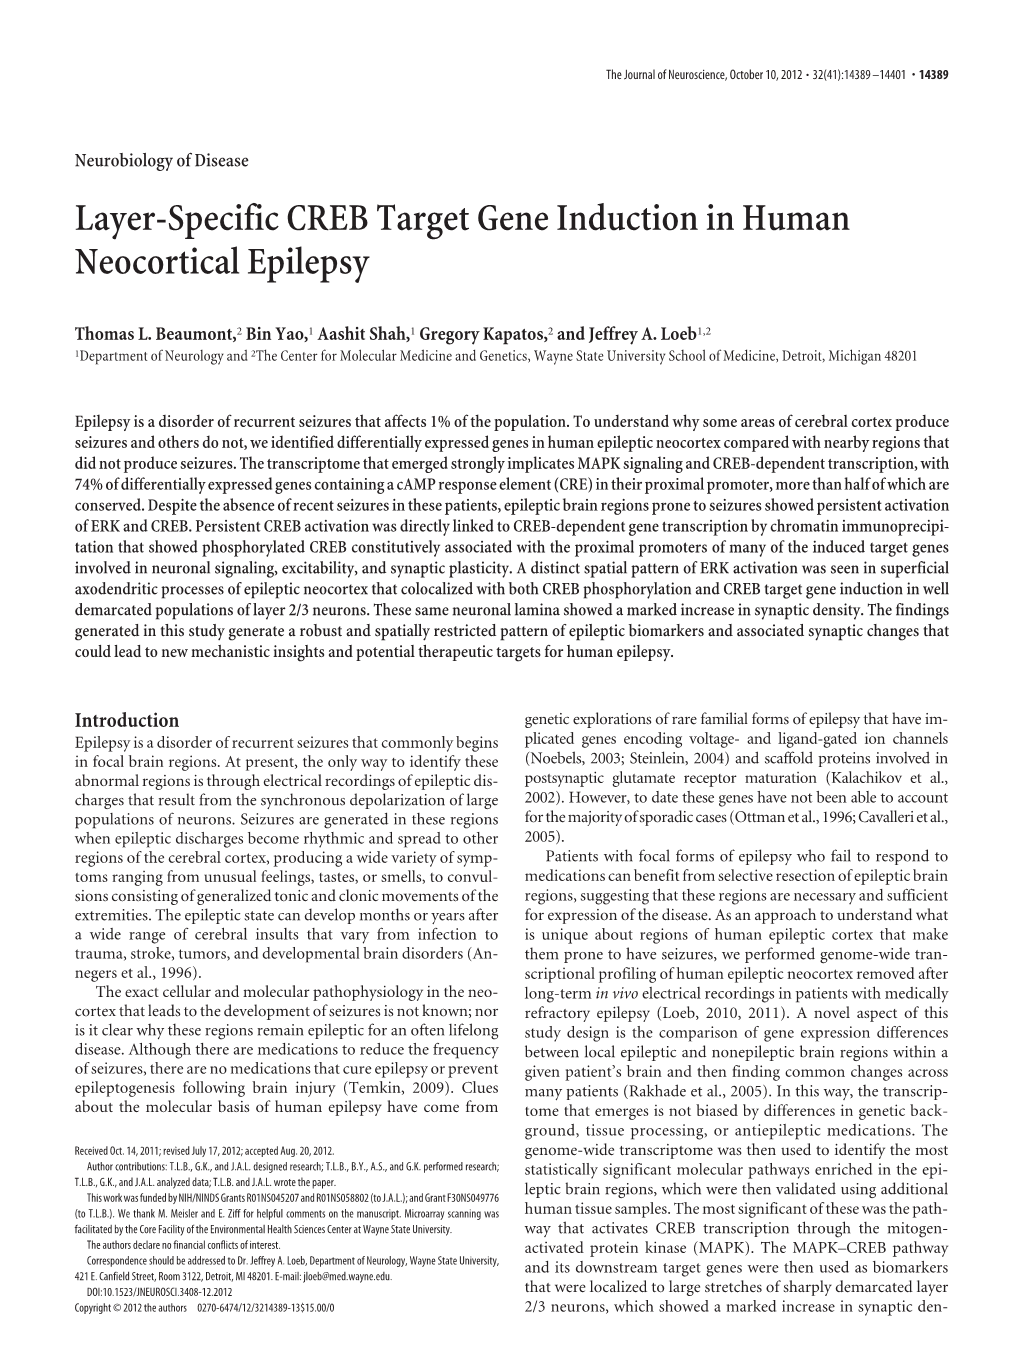 Layer-Specific CREB Target Gene Induction in Human Neocortical Epilepsy